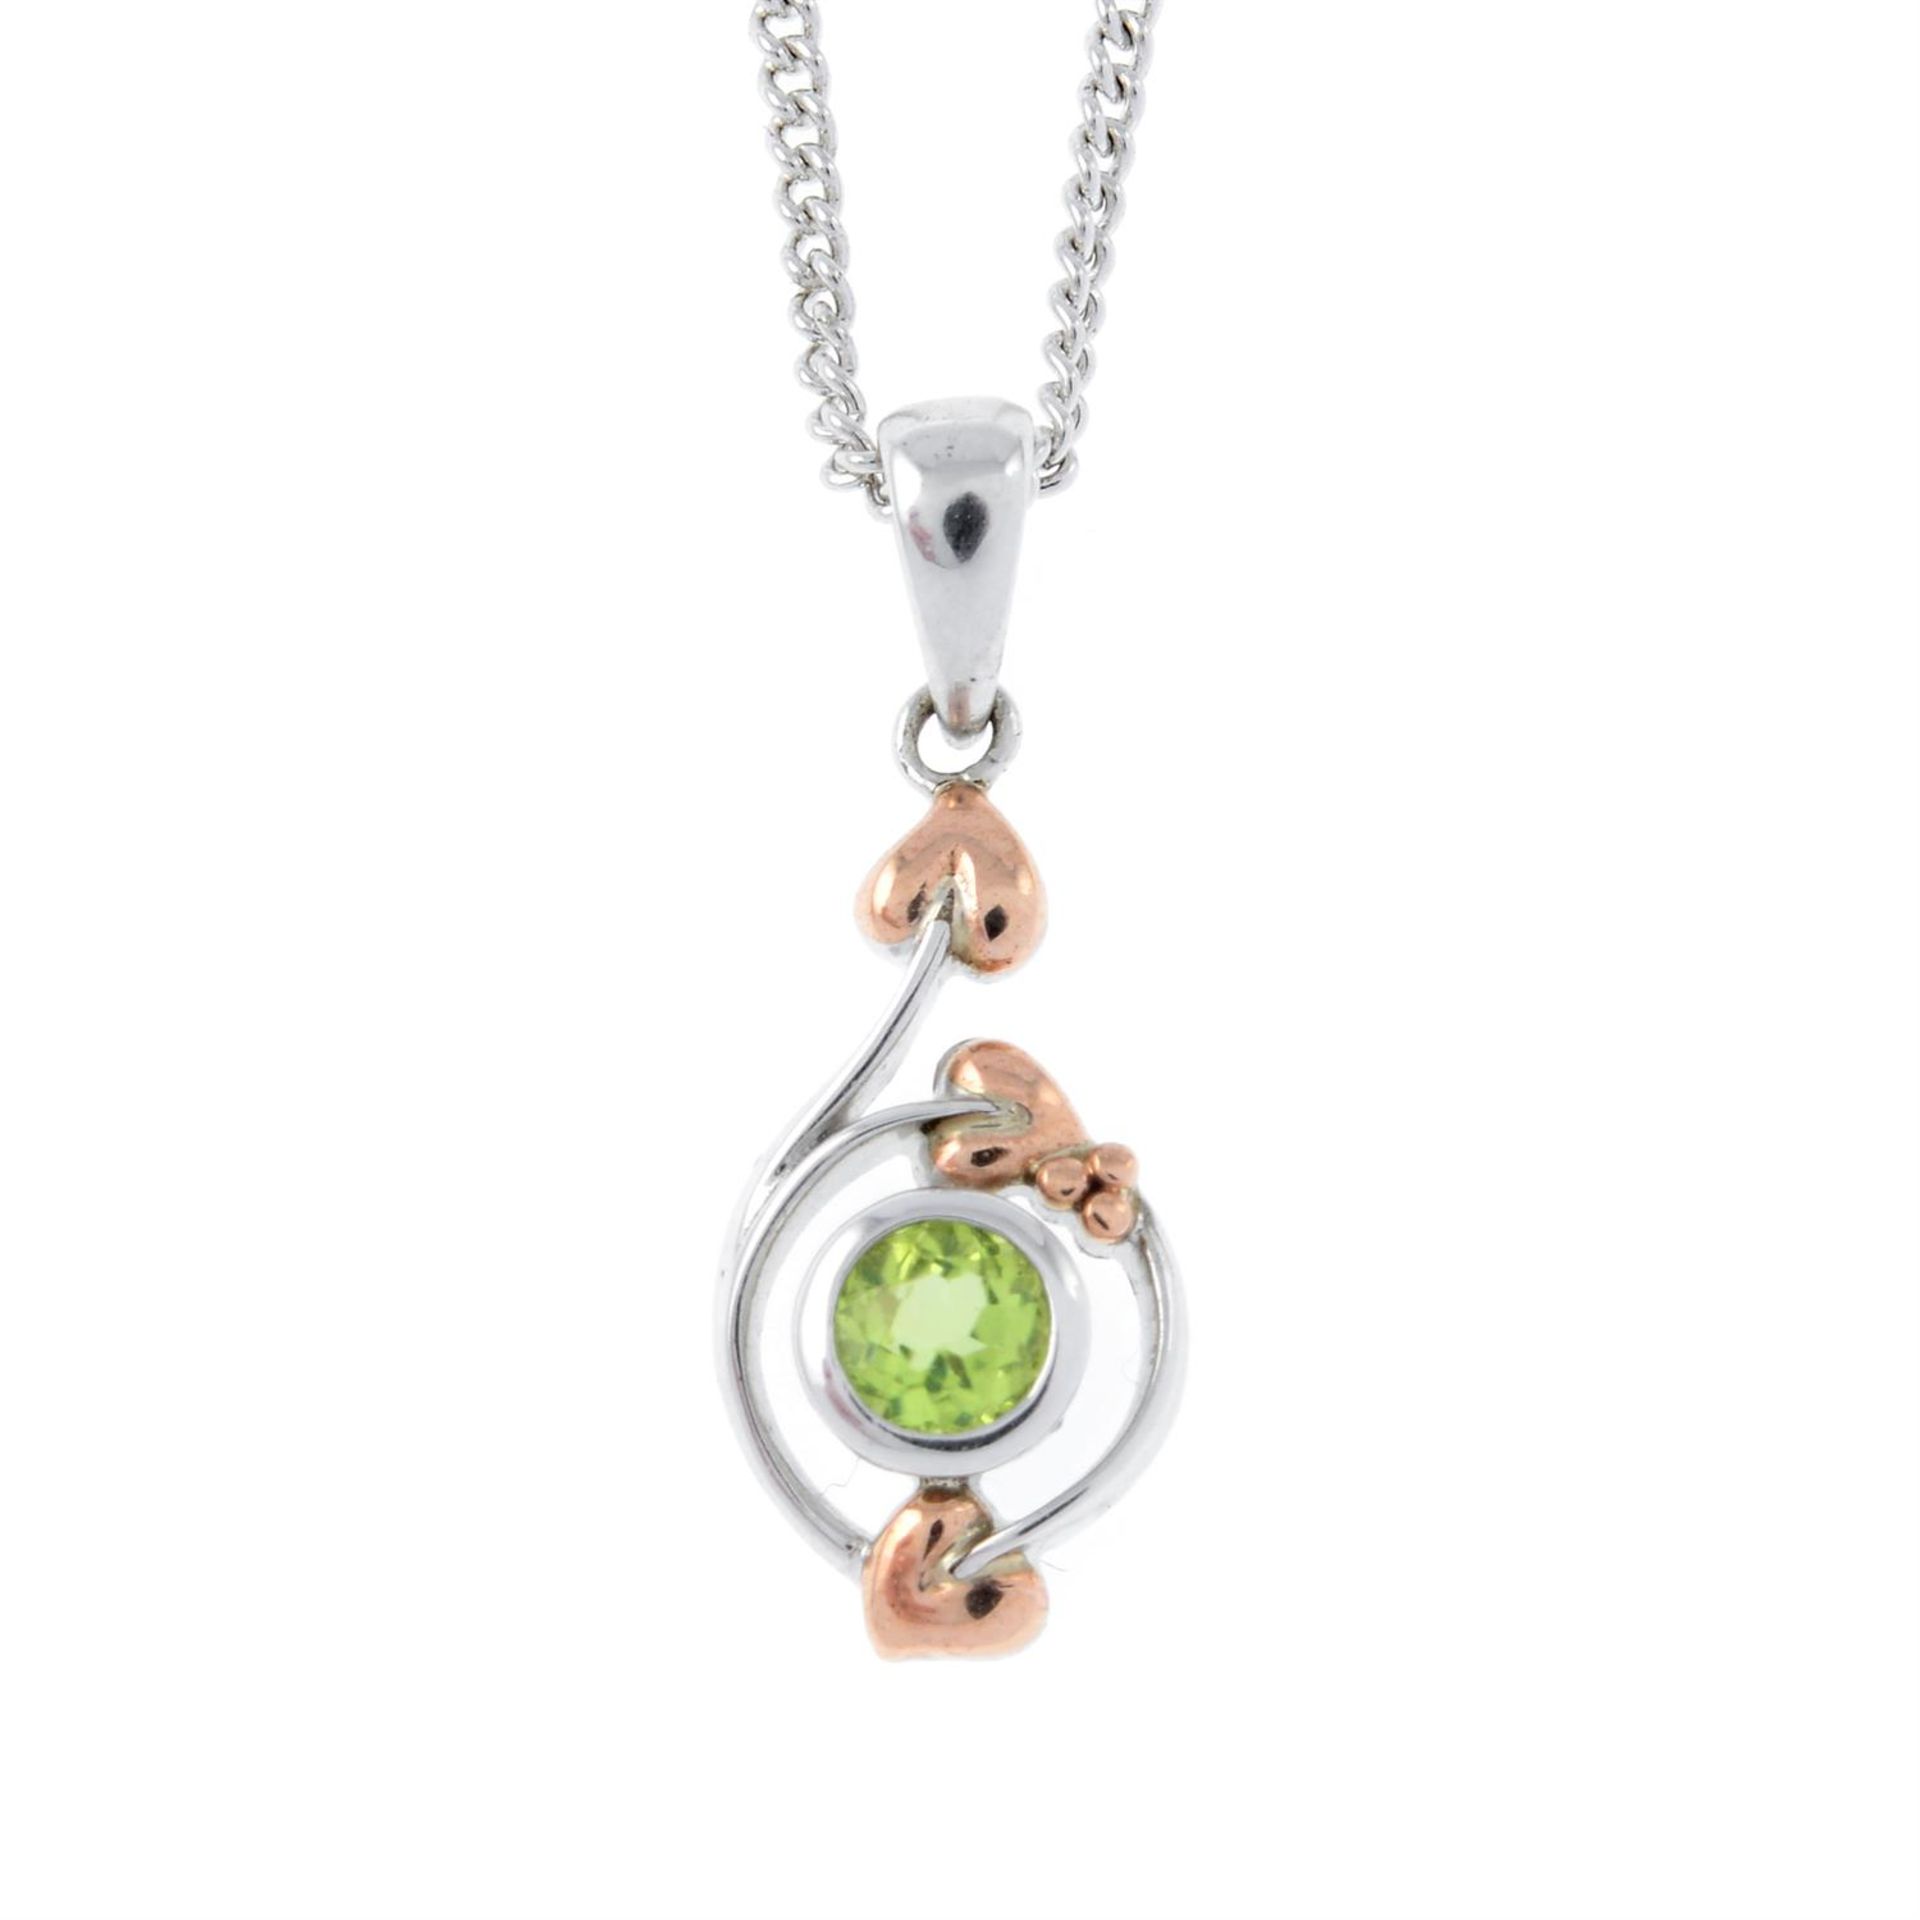 A silver peridot openwork pendant, with chain, by Clogau.